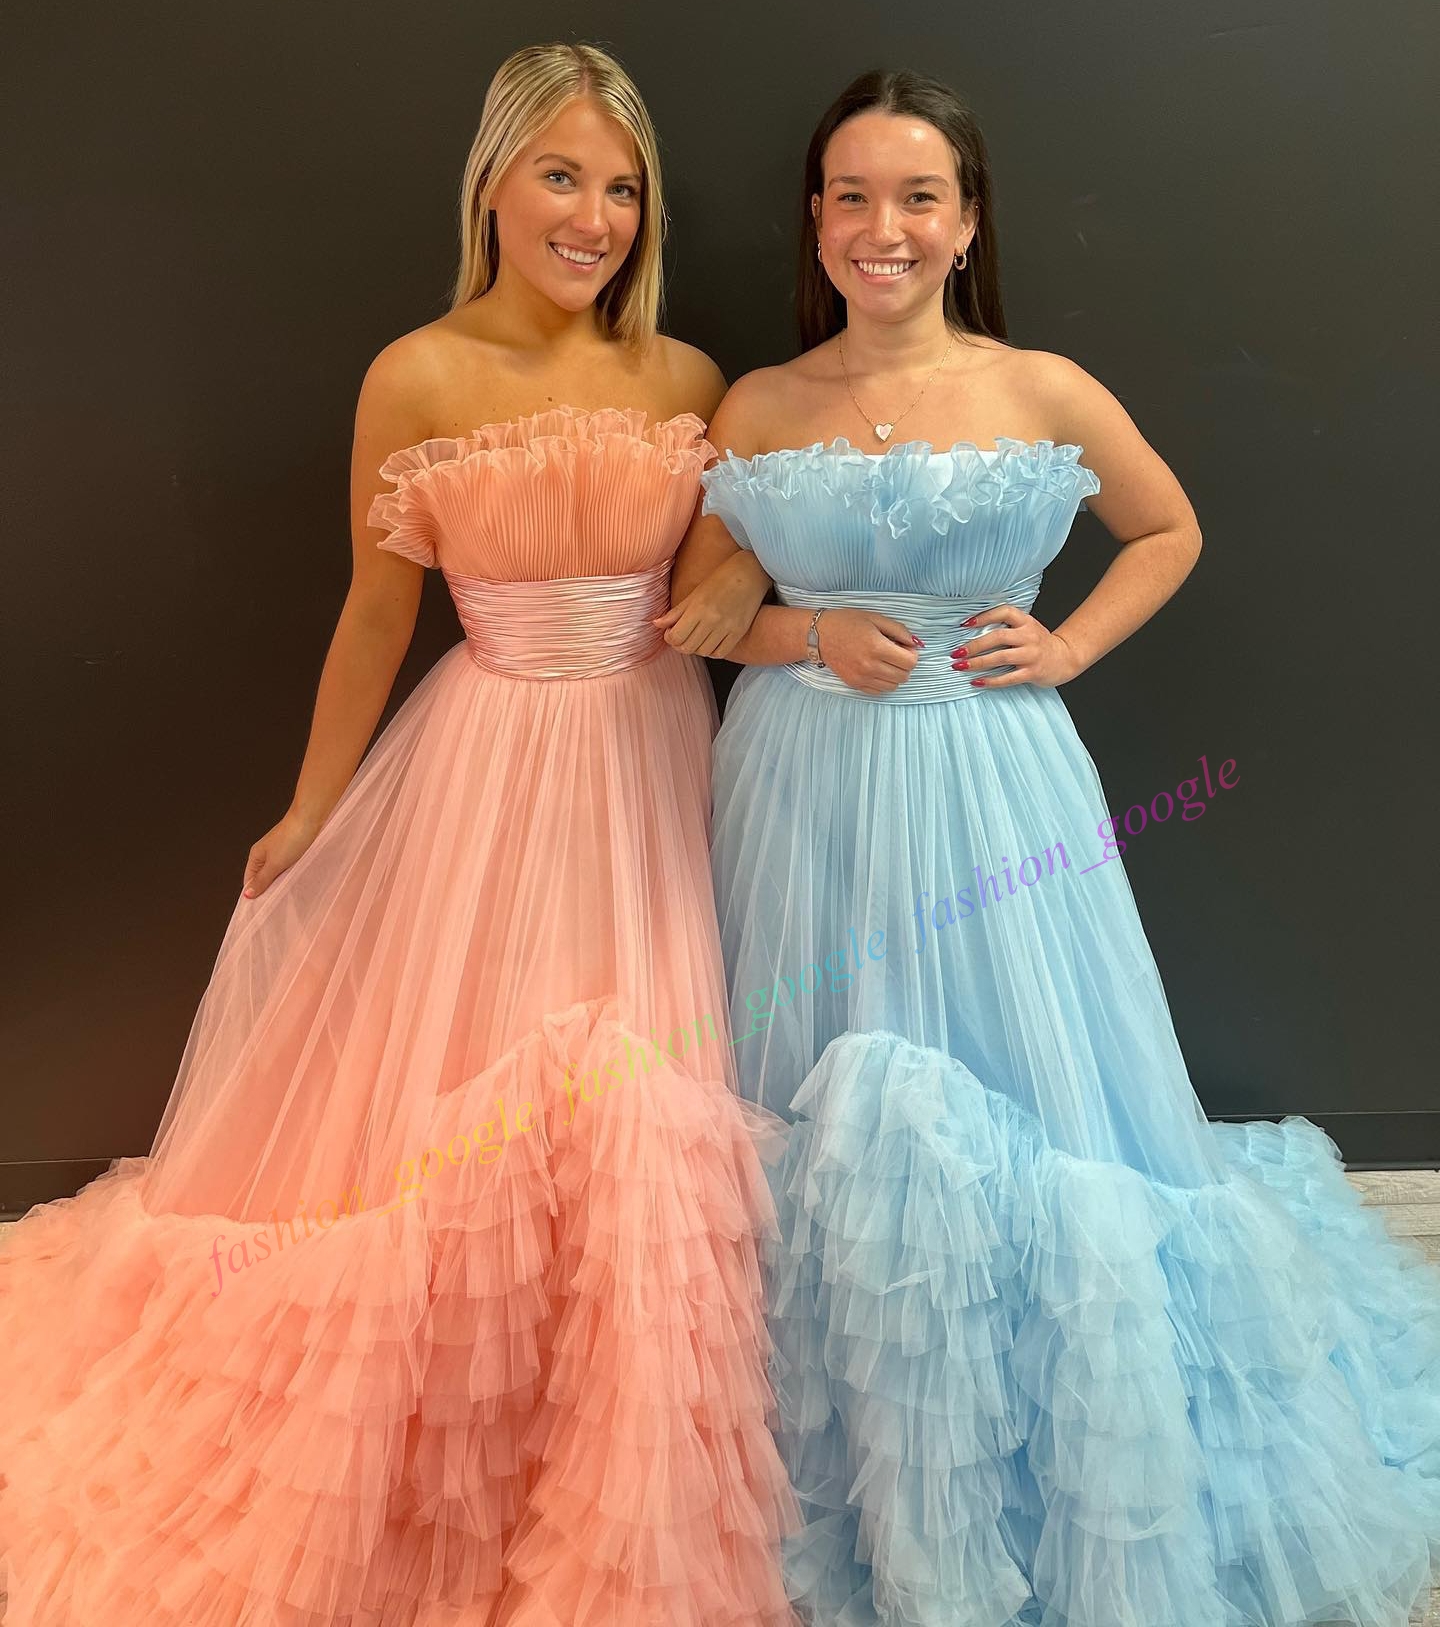 Crumb Catcher Prom Dress Candy Color Tier Ruffle Tulle A-Line Lady Pageant Prom Spring Evening Event Hoco Gala Cocktail Red Carpet Gown Photoshoot Fuchsia Purple Aqua